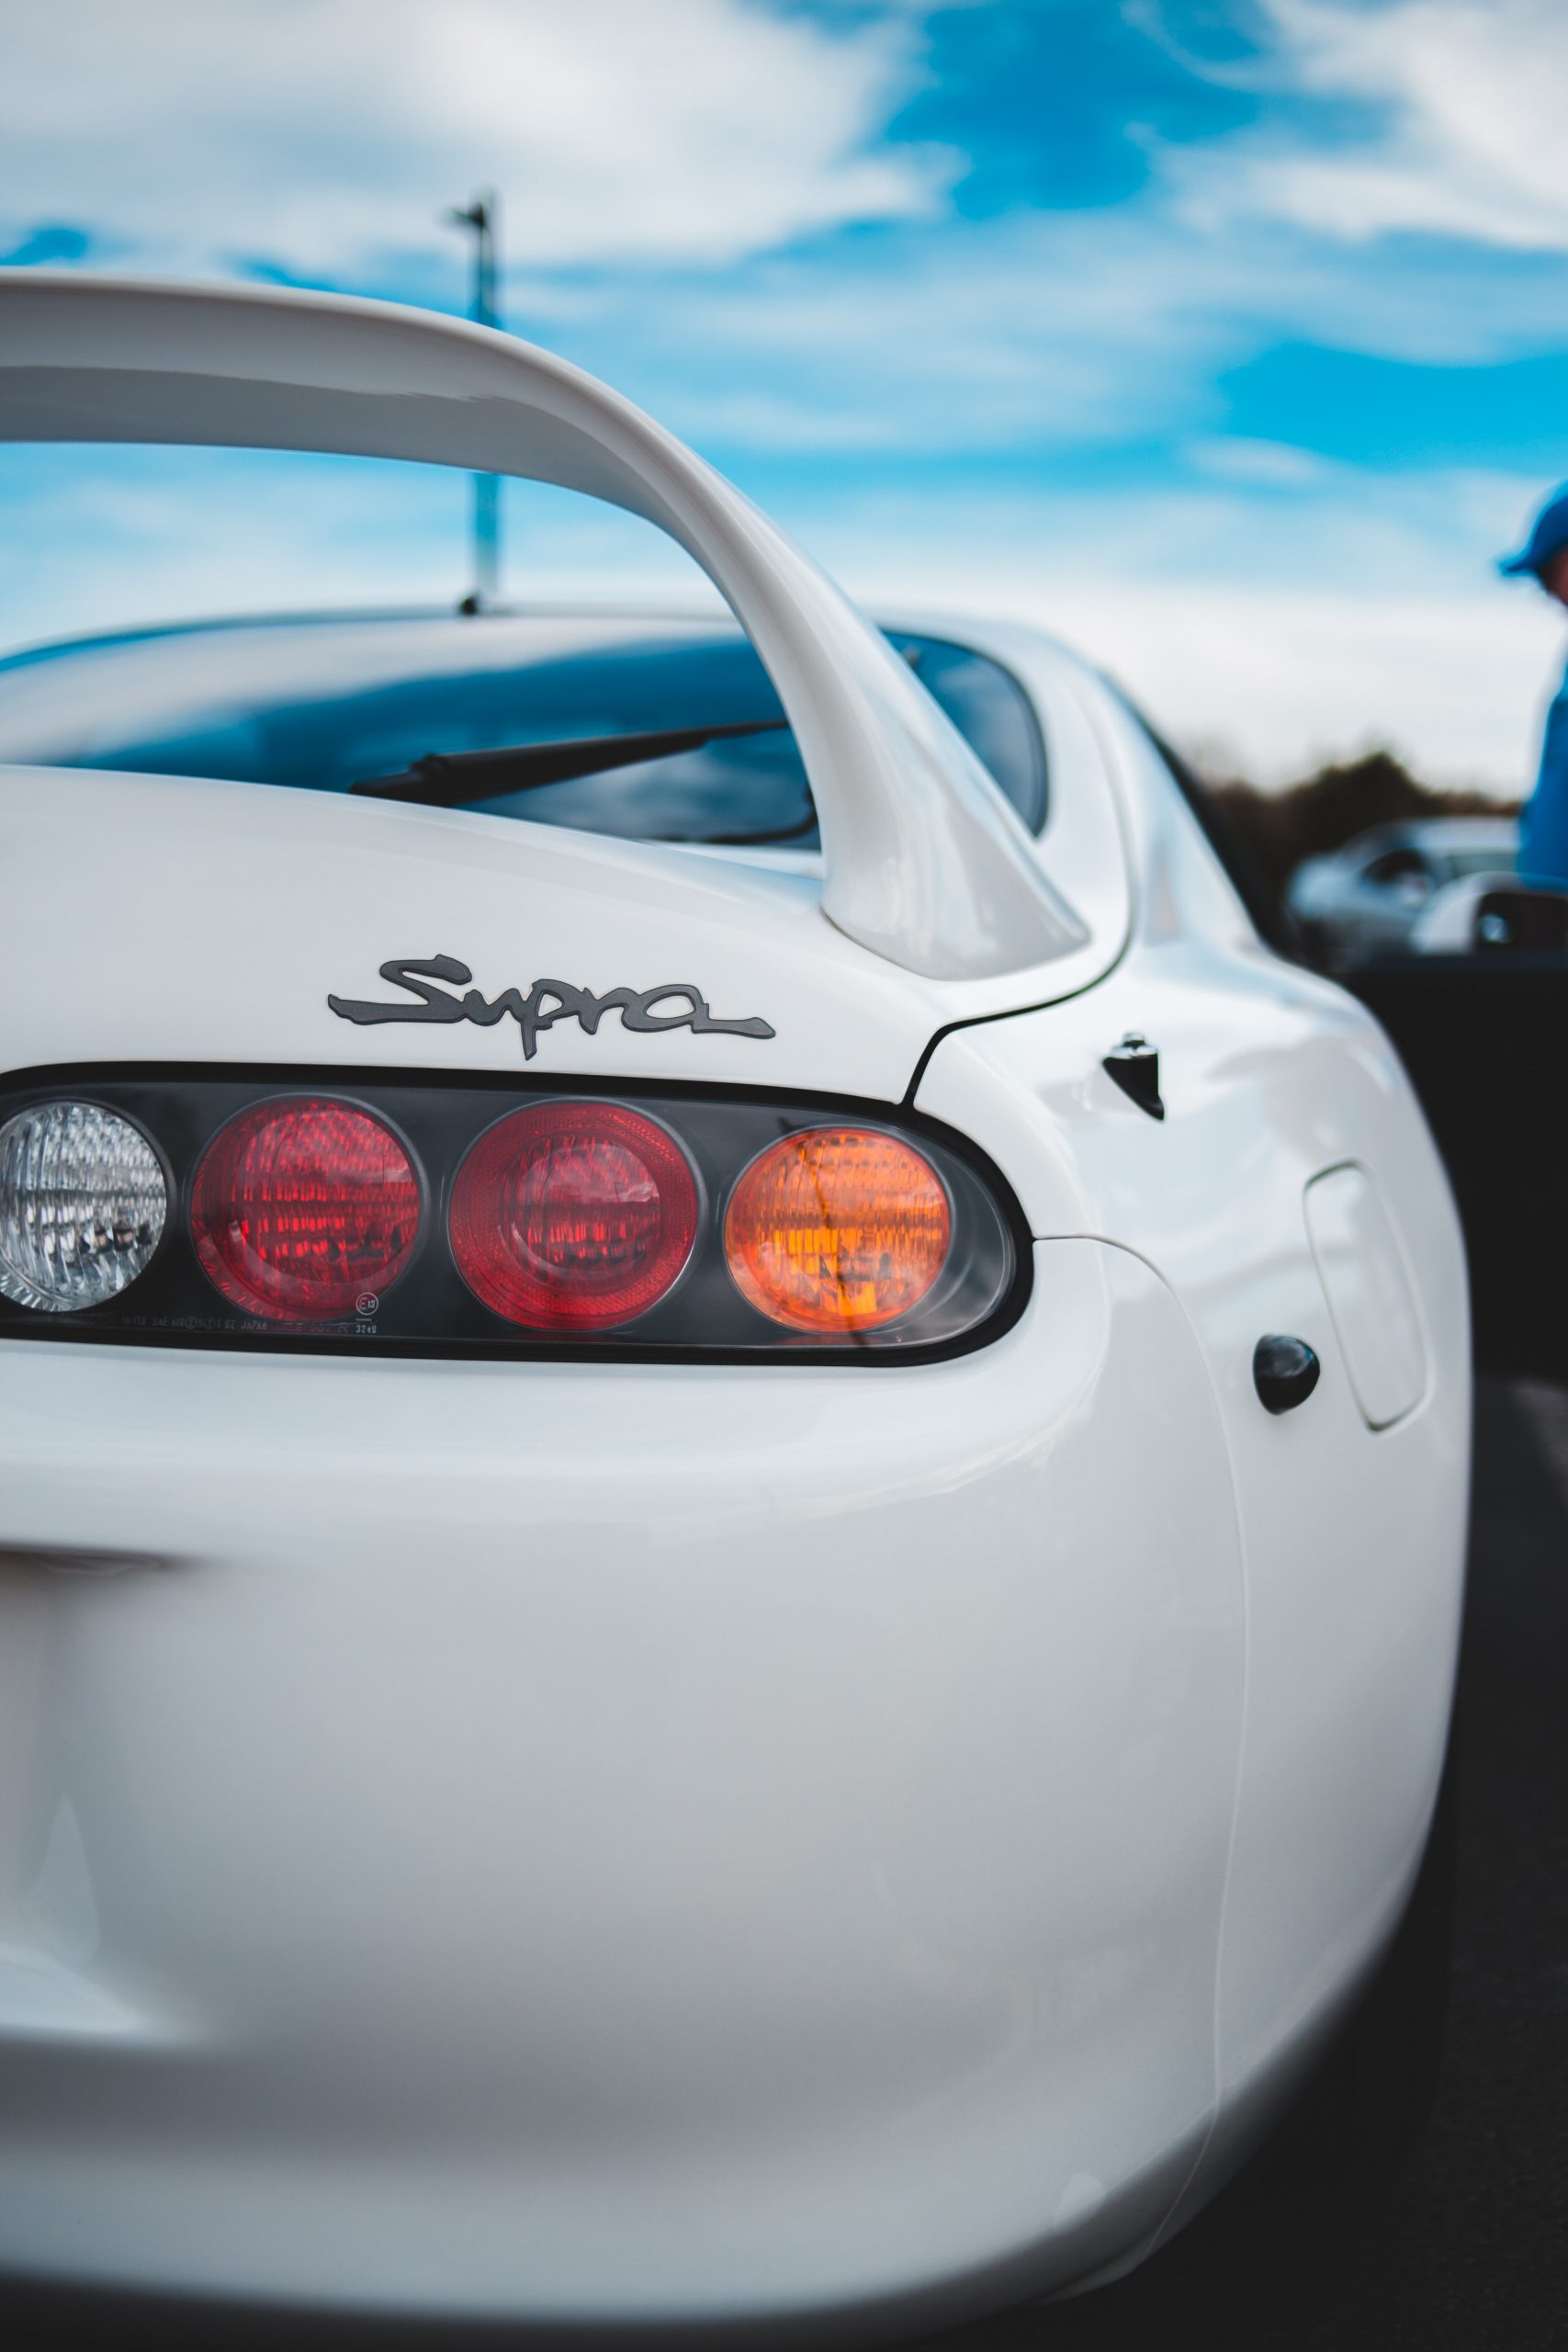 Why is the 1994 Toyota Supra banned?